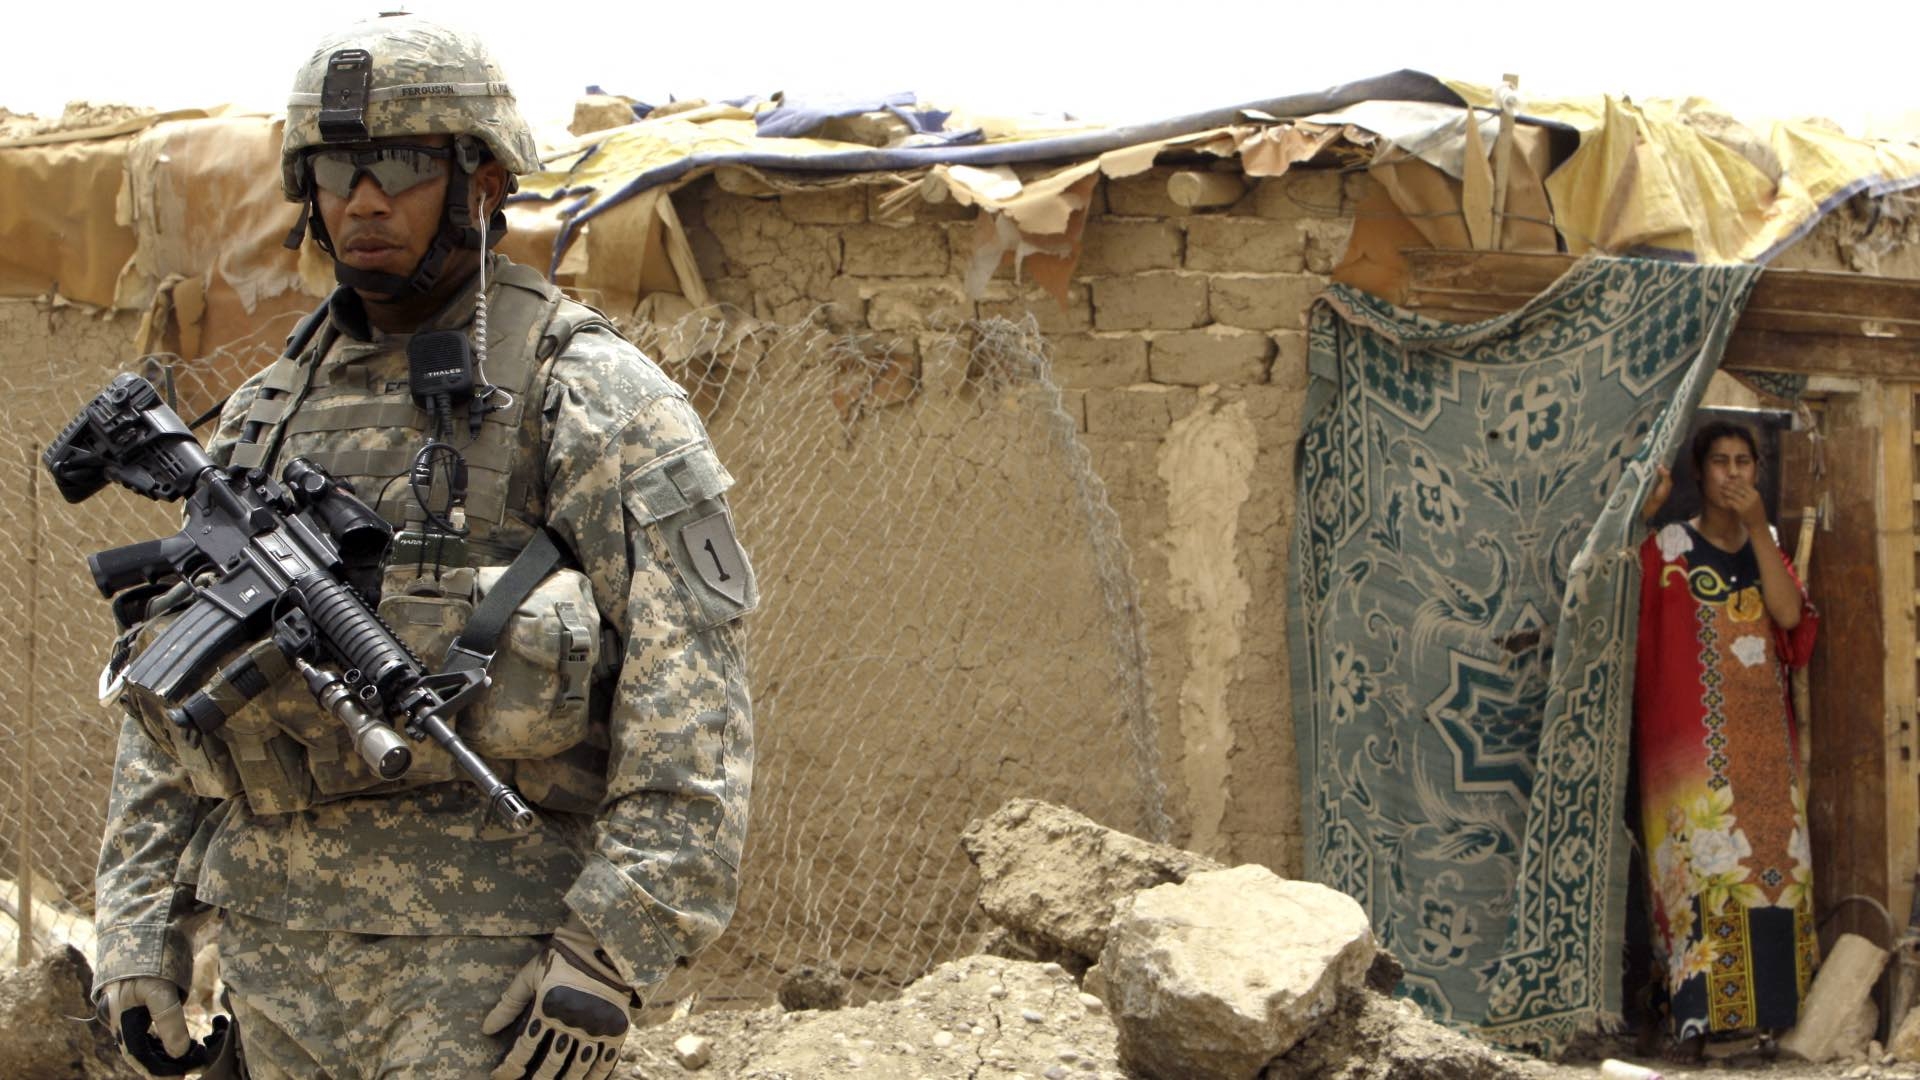 An Iraqi woman looks on as a US soldier secures the Chikuk complex in the Kadhimiya district of northwest Baghdad, on 21 July 2009.